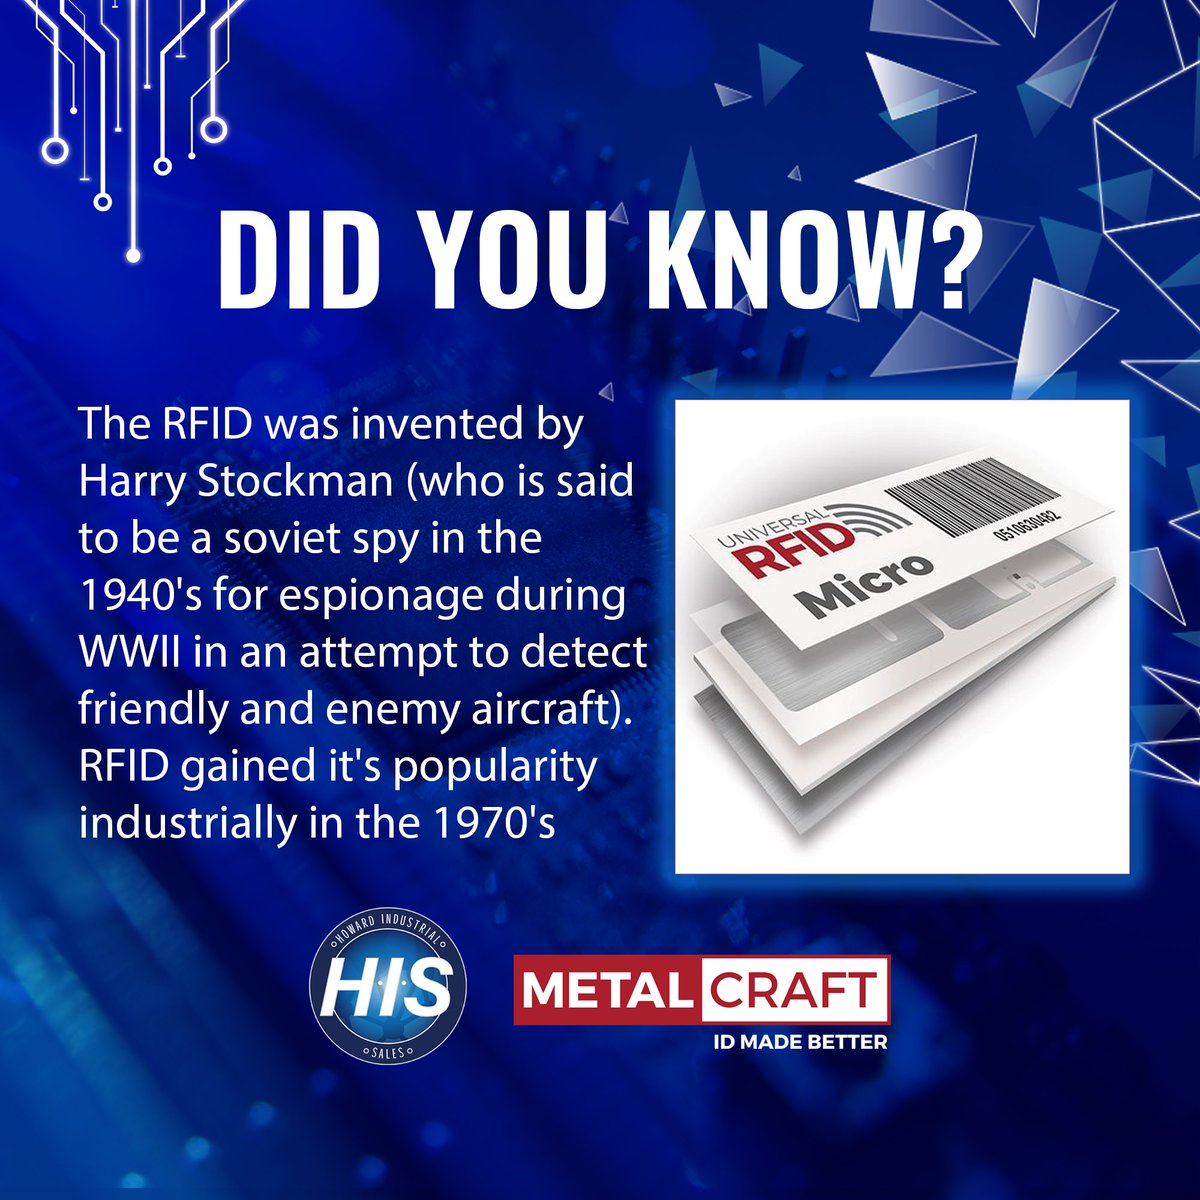 RFID (Radio Frequency Identification) has come a long way and has been a major asset to our clients in recent years.

#RFIDtag #RFID #accesscontrol #Industry #technology #innovation